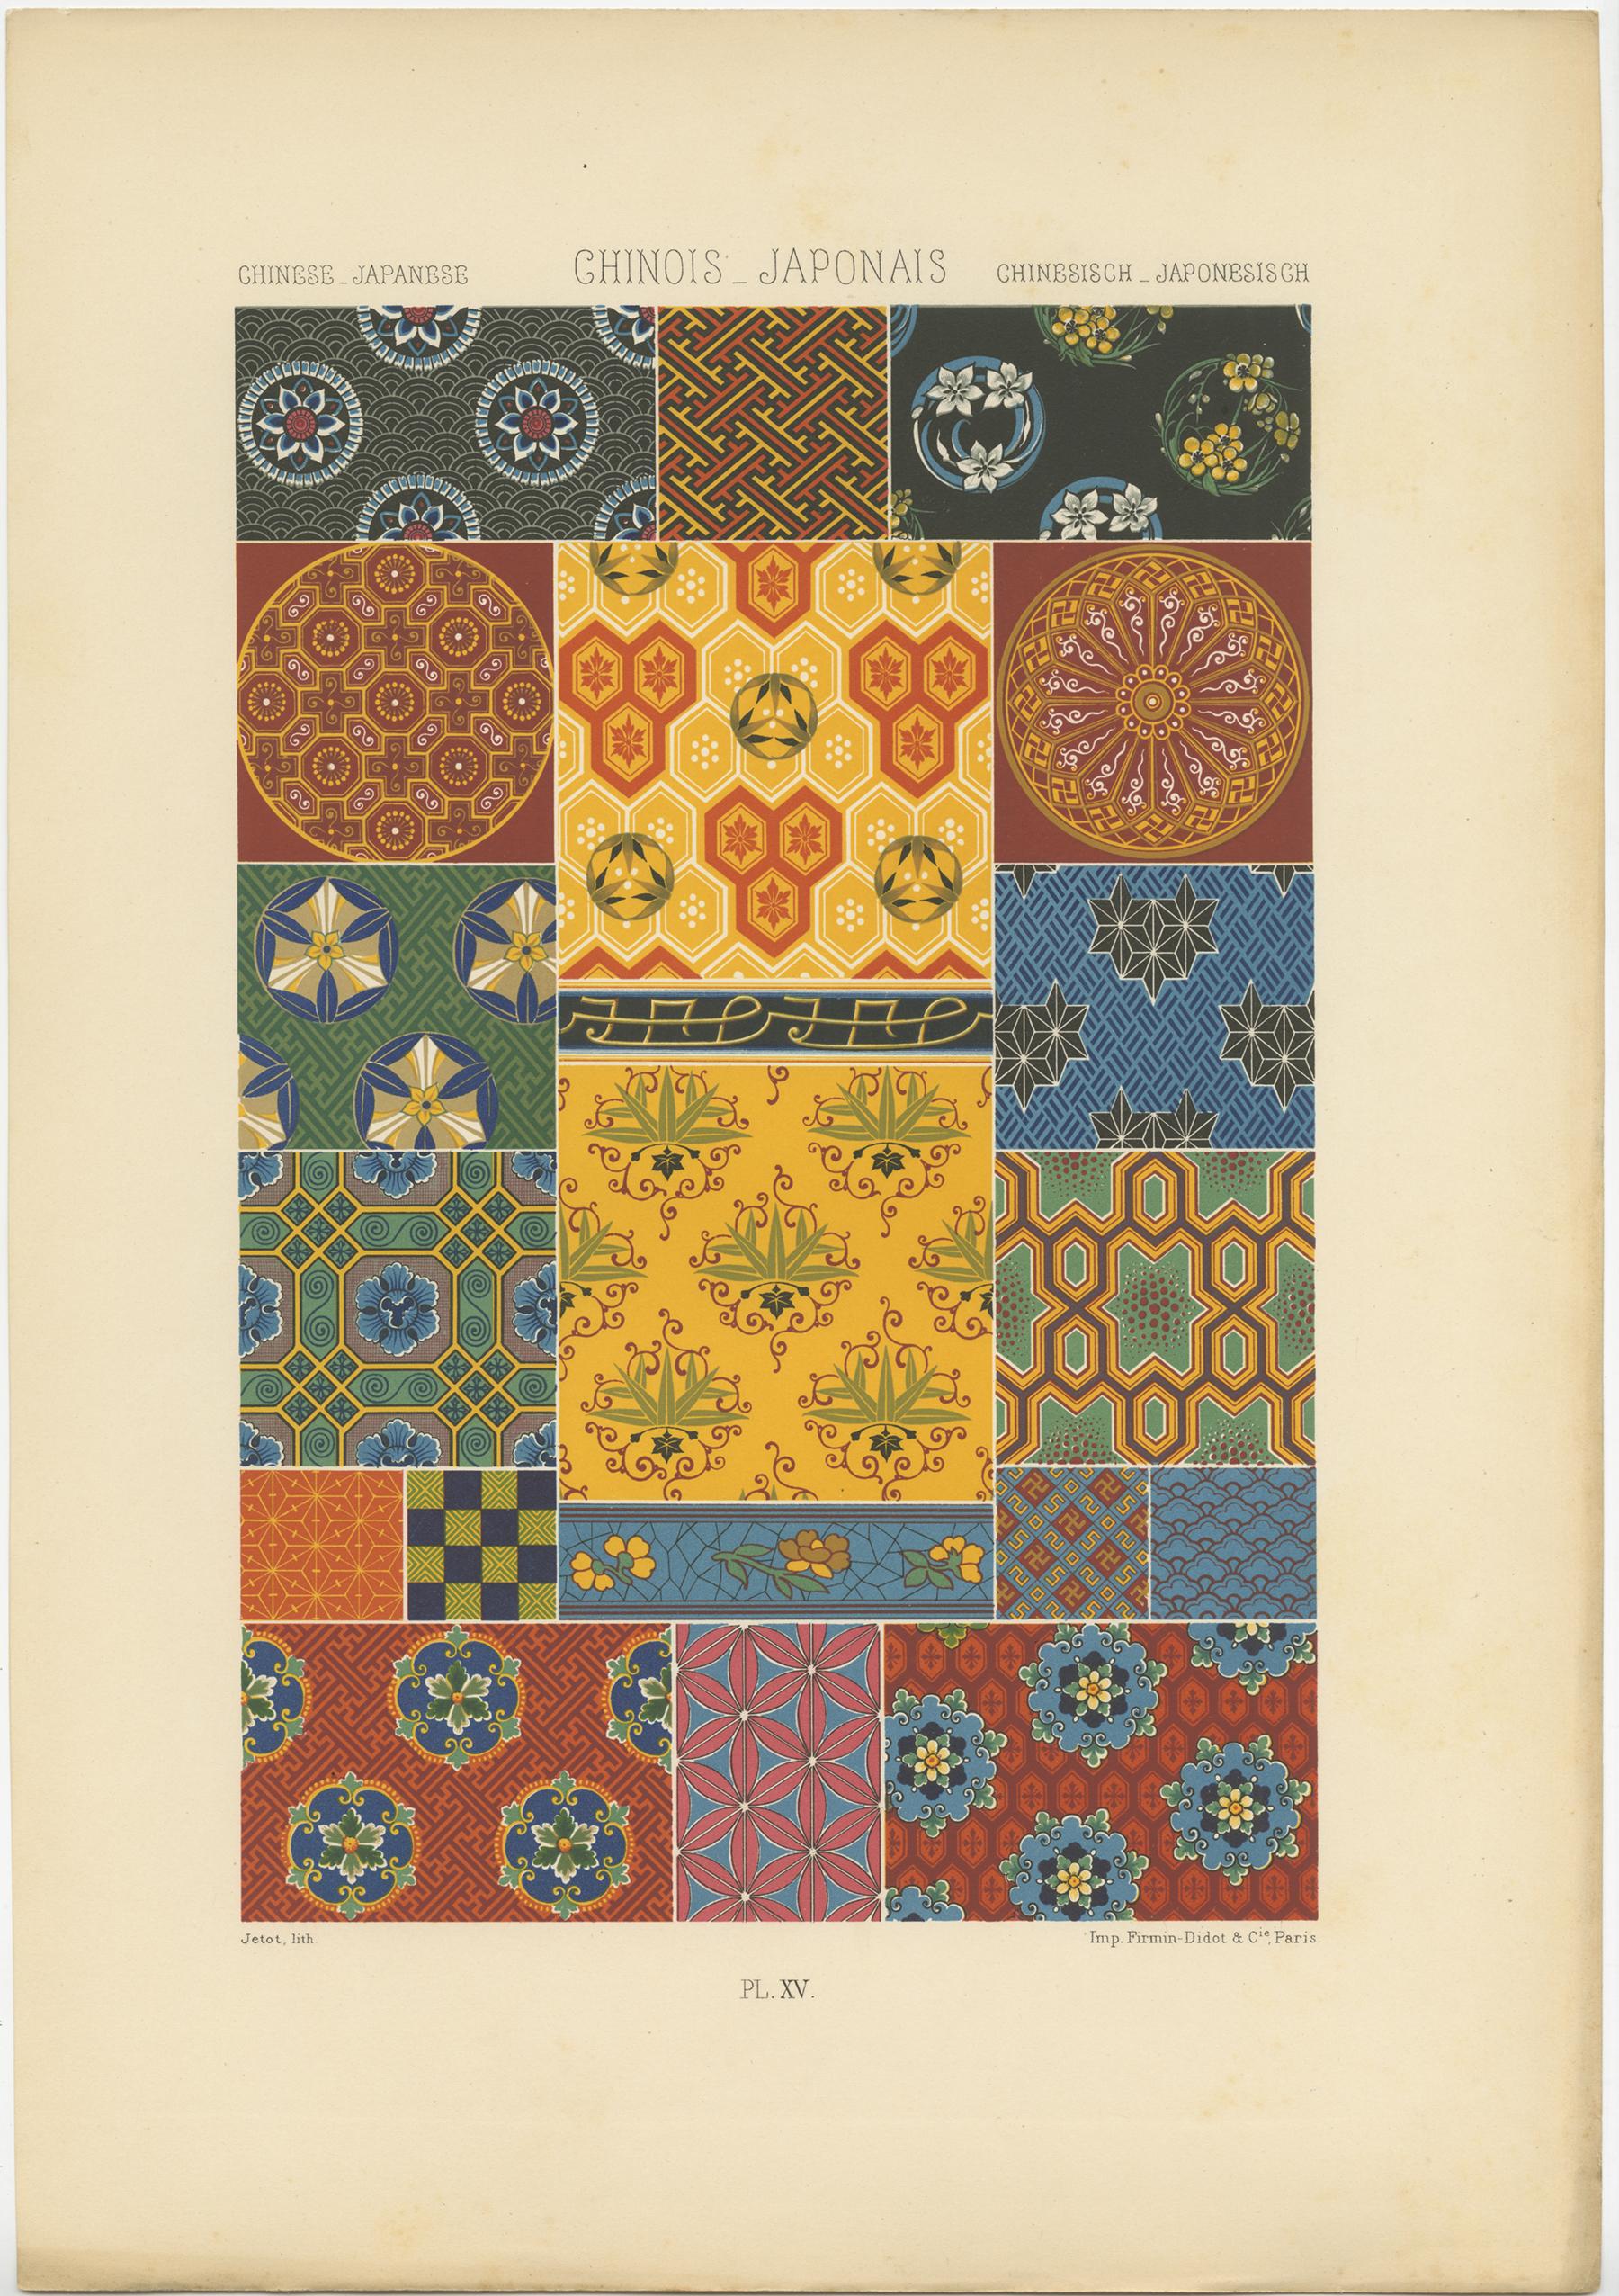 Antique print titled 'Chinese, Japanese - Chinois, Japonais - Chinesisch, Japonesisch'. Chromolithograph of Chinese - Japanese ornaments and decorative arts. This print originates from 'l'Ornement Polychrome' by Auguste Racinet. Published, circa